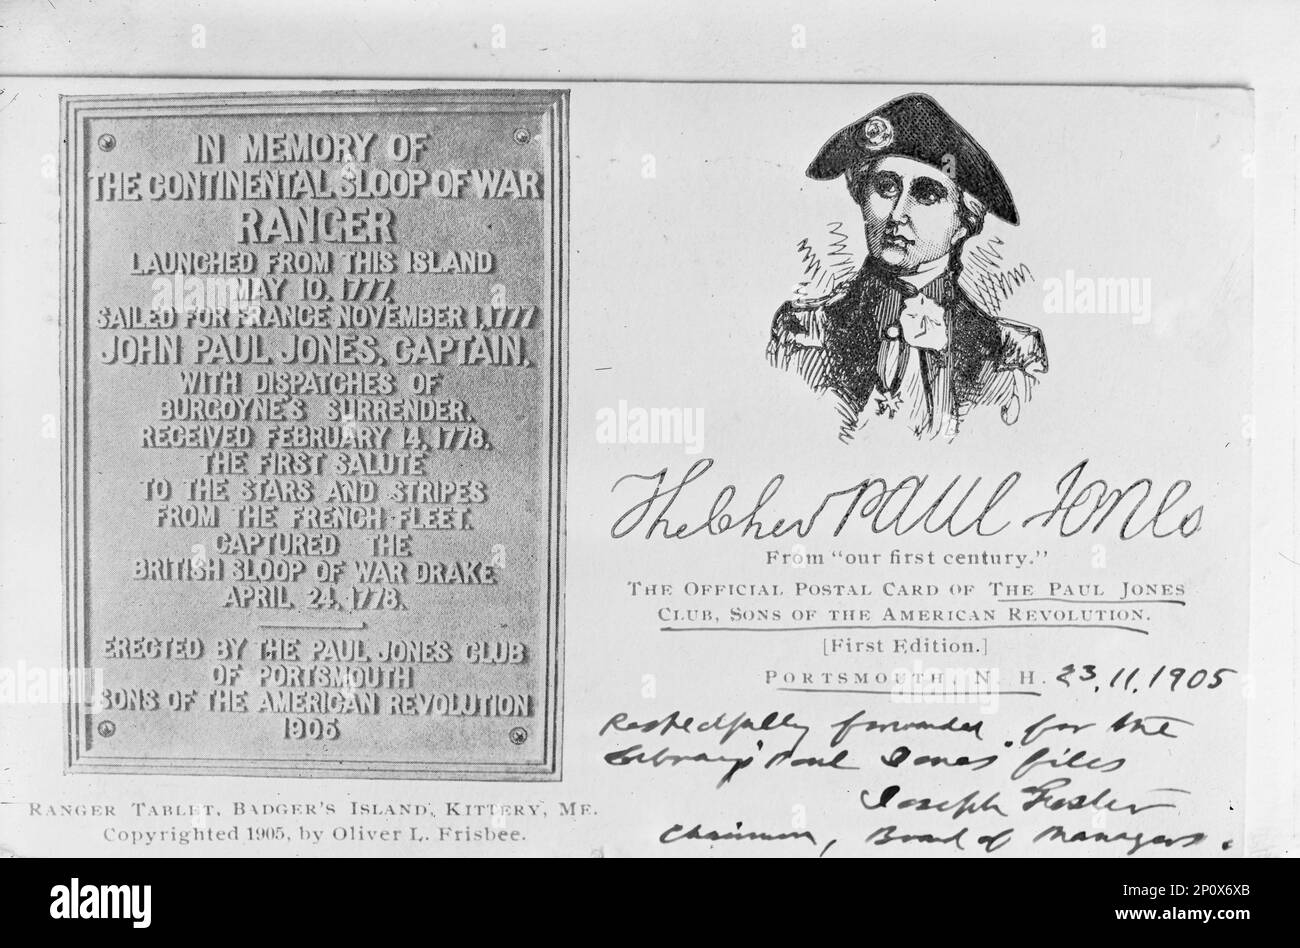 John Paul Jones, Official Postal Card of The Paul Jones Club, Sons of the American Revolution, 1905, (1917). First Edition. Portrait and inscription: 'In memory of the continental sloop of war Ranger, launched from this island May 10, 1777. Sailed for France November 1, 1777. John Paul Jones, Captain. With dispatches of Burgoyne's surrender. Received February 14, 1778. The first salute to the stars and stripes from the French fleet. Captured the British sloop of war Drake, April 24, 1778. Erected by the Paul Jones Club of Portsmouth'. Jones was the United States' first naval war hero, father o Stock Photo